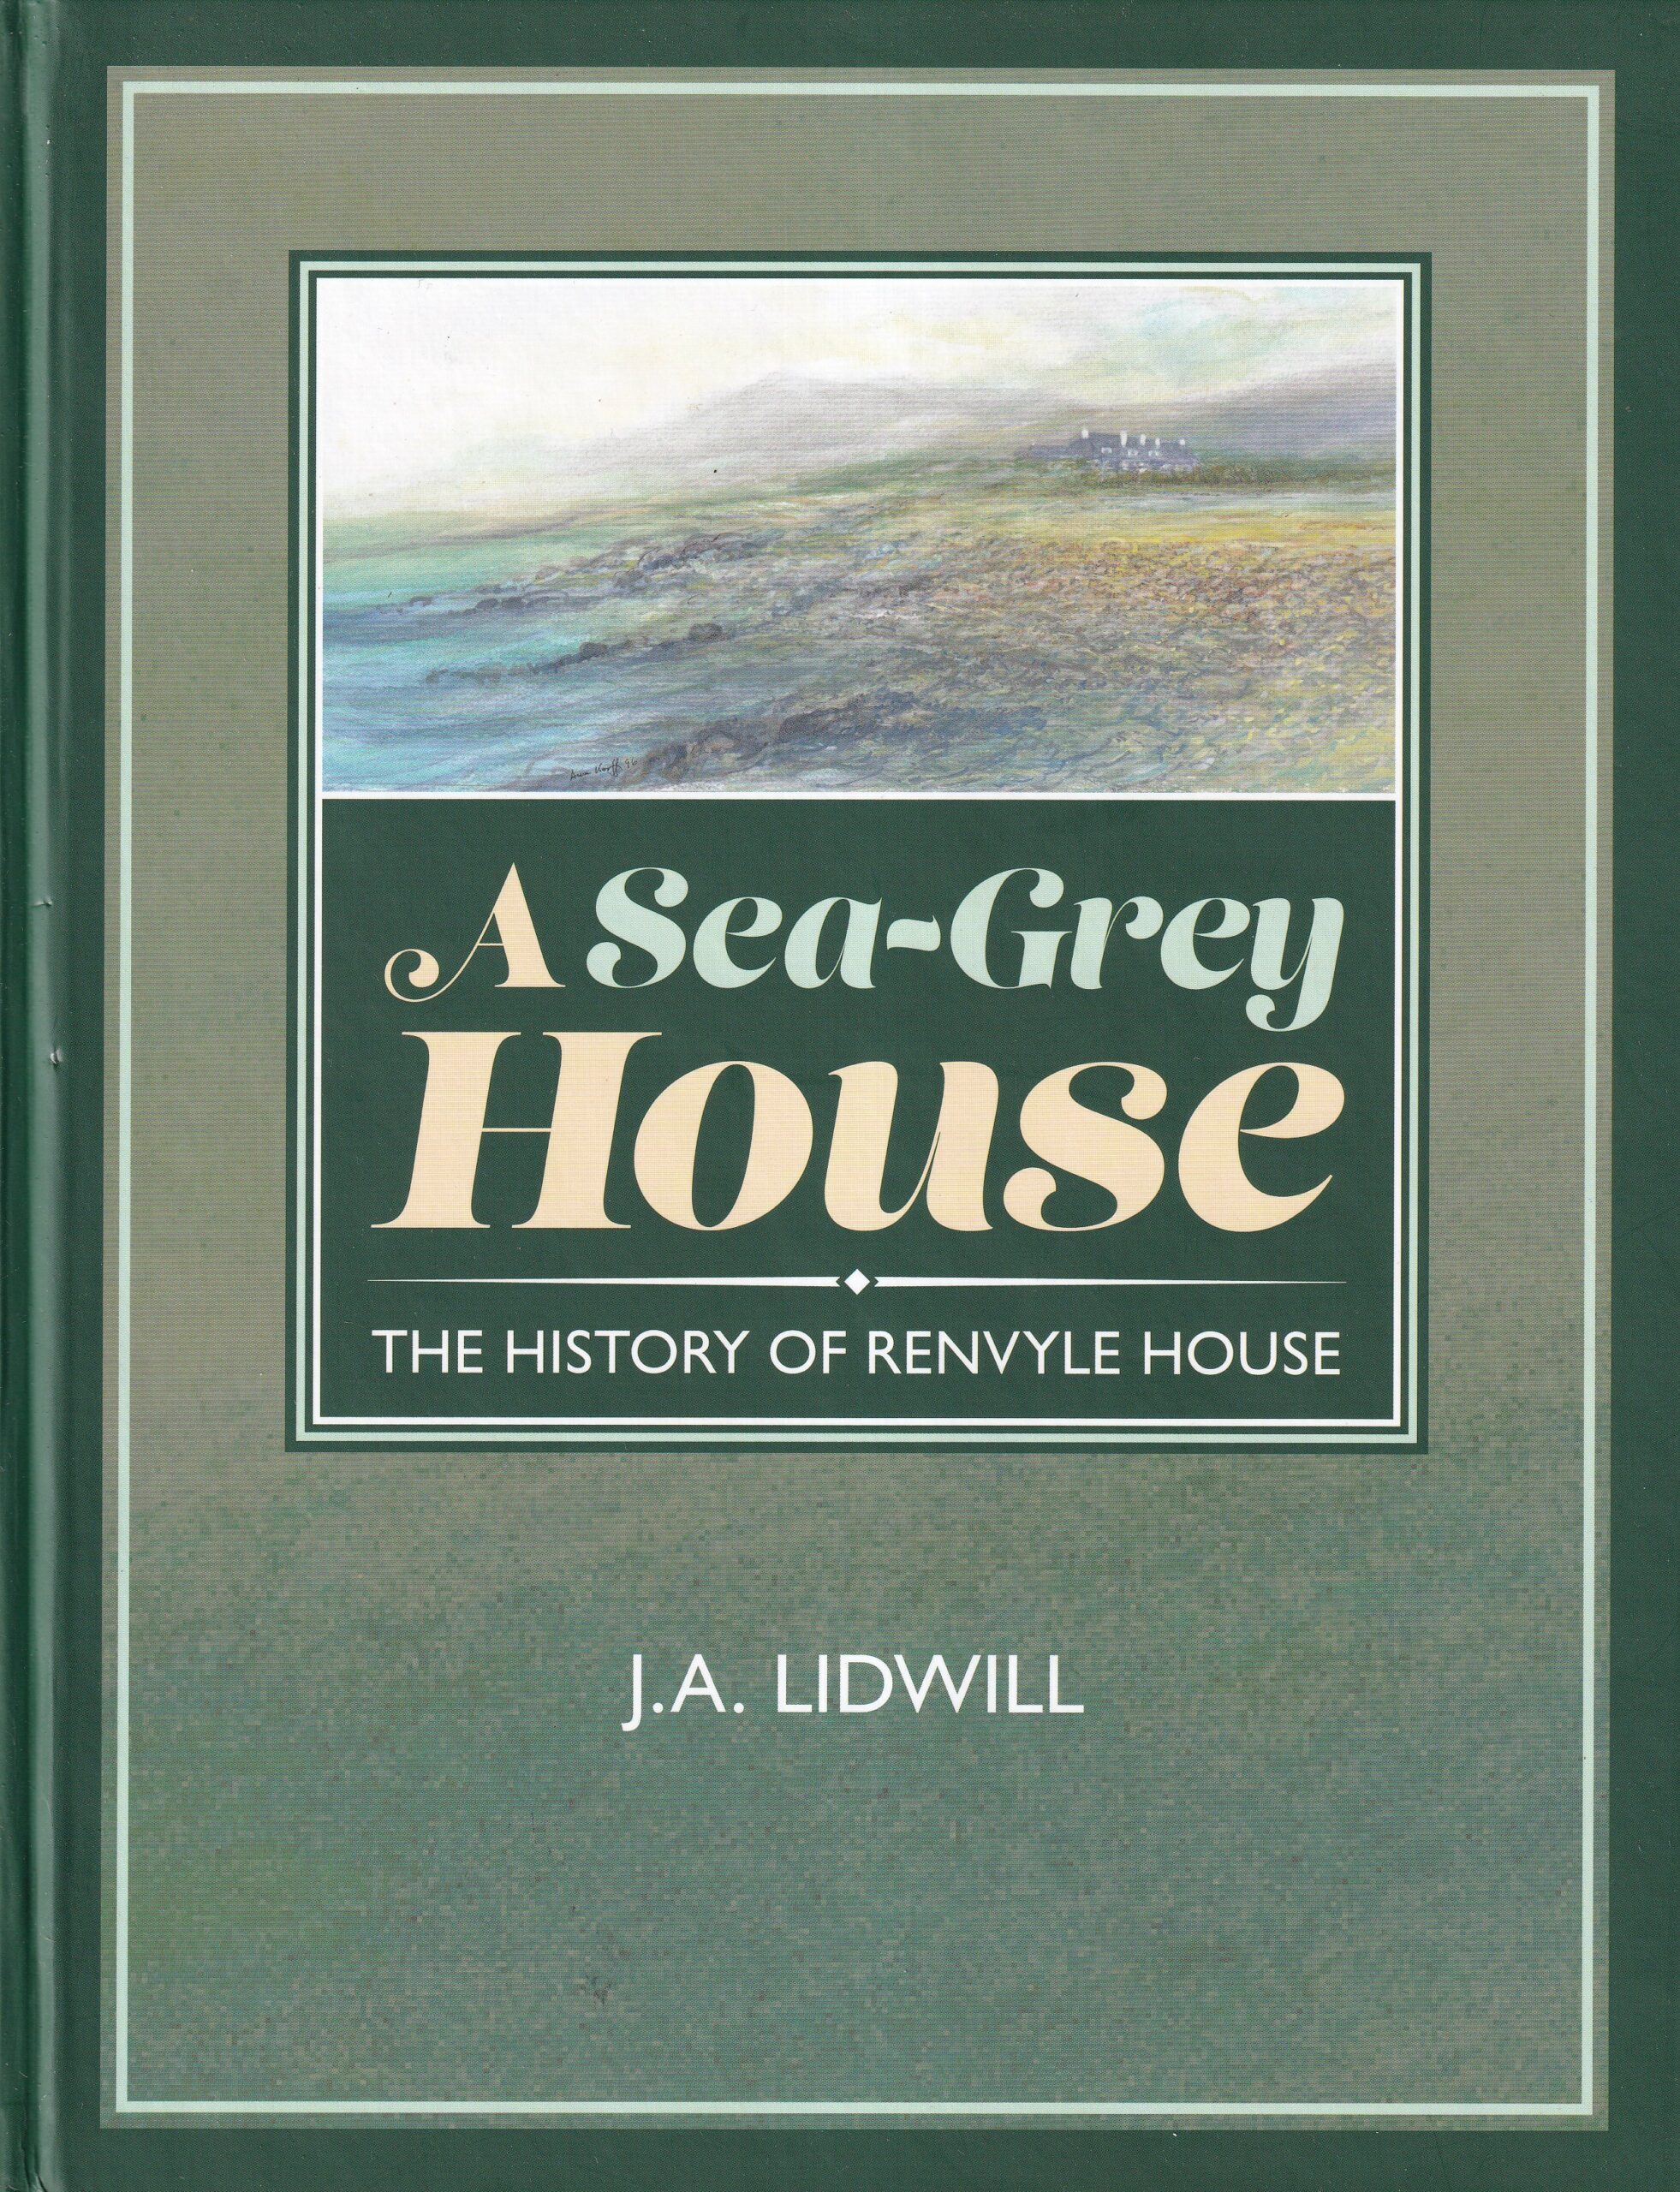 A Sea-Grey House: The History of Renvyle House by J.A. Lidwill